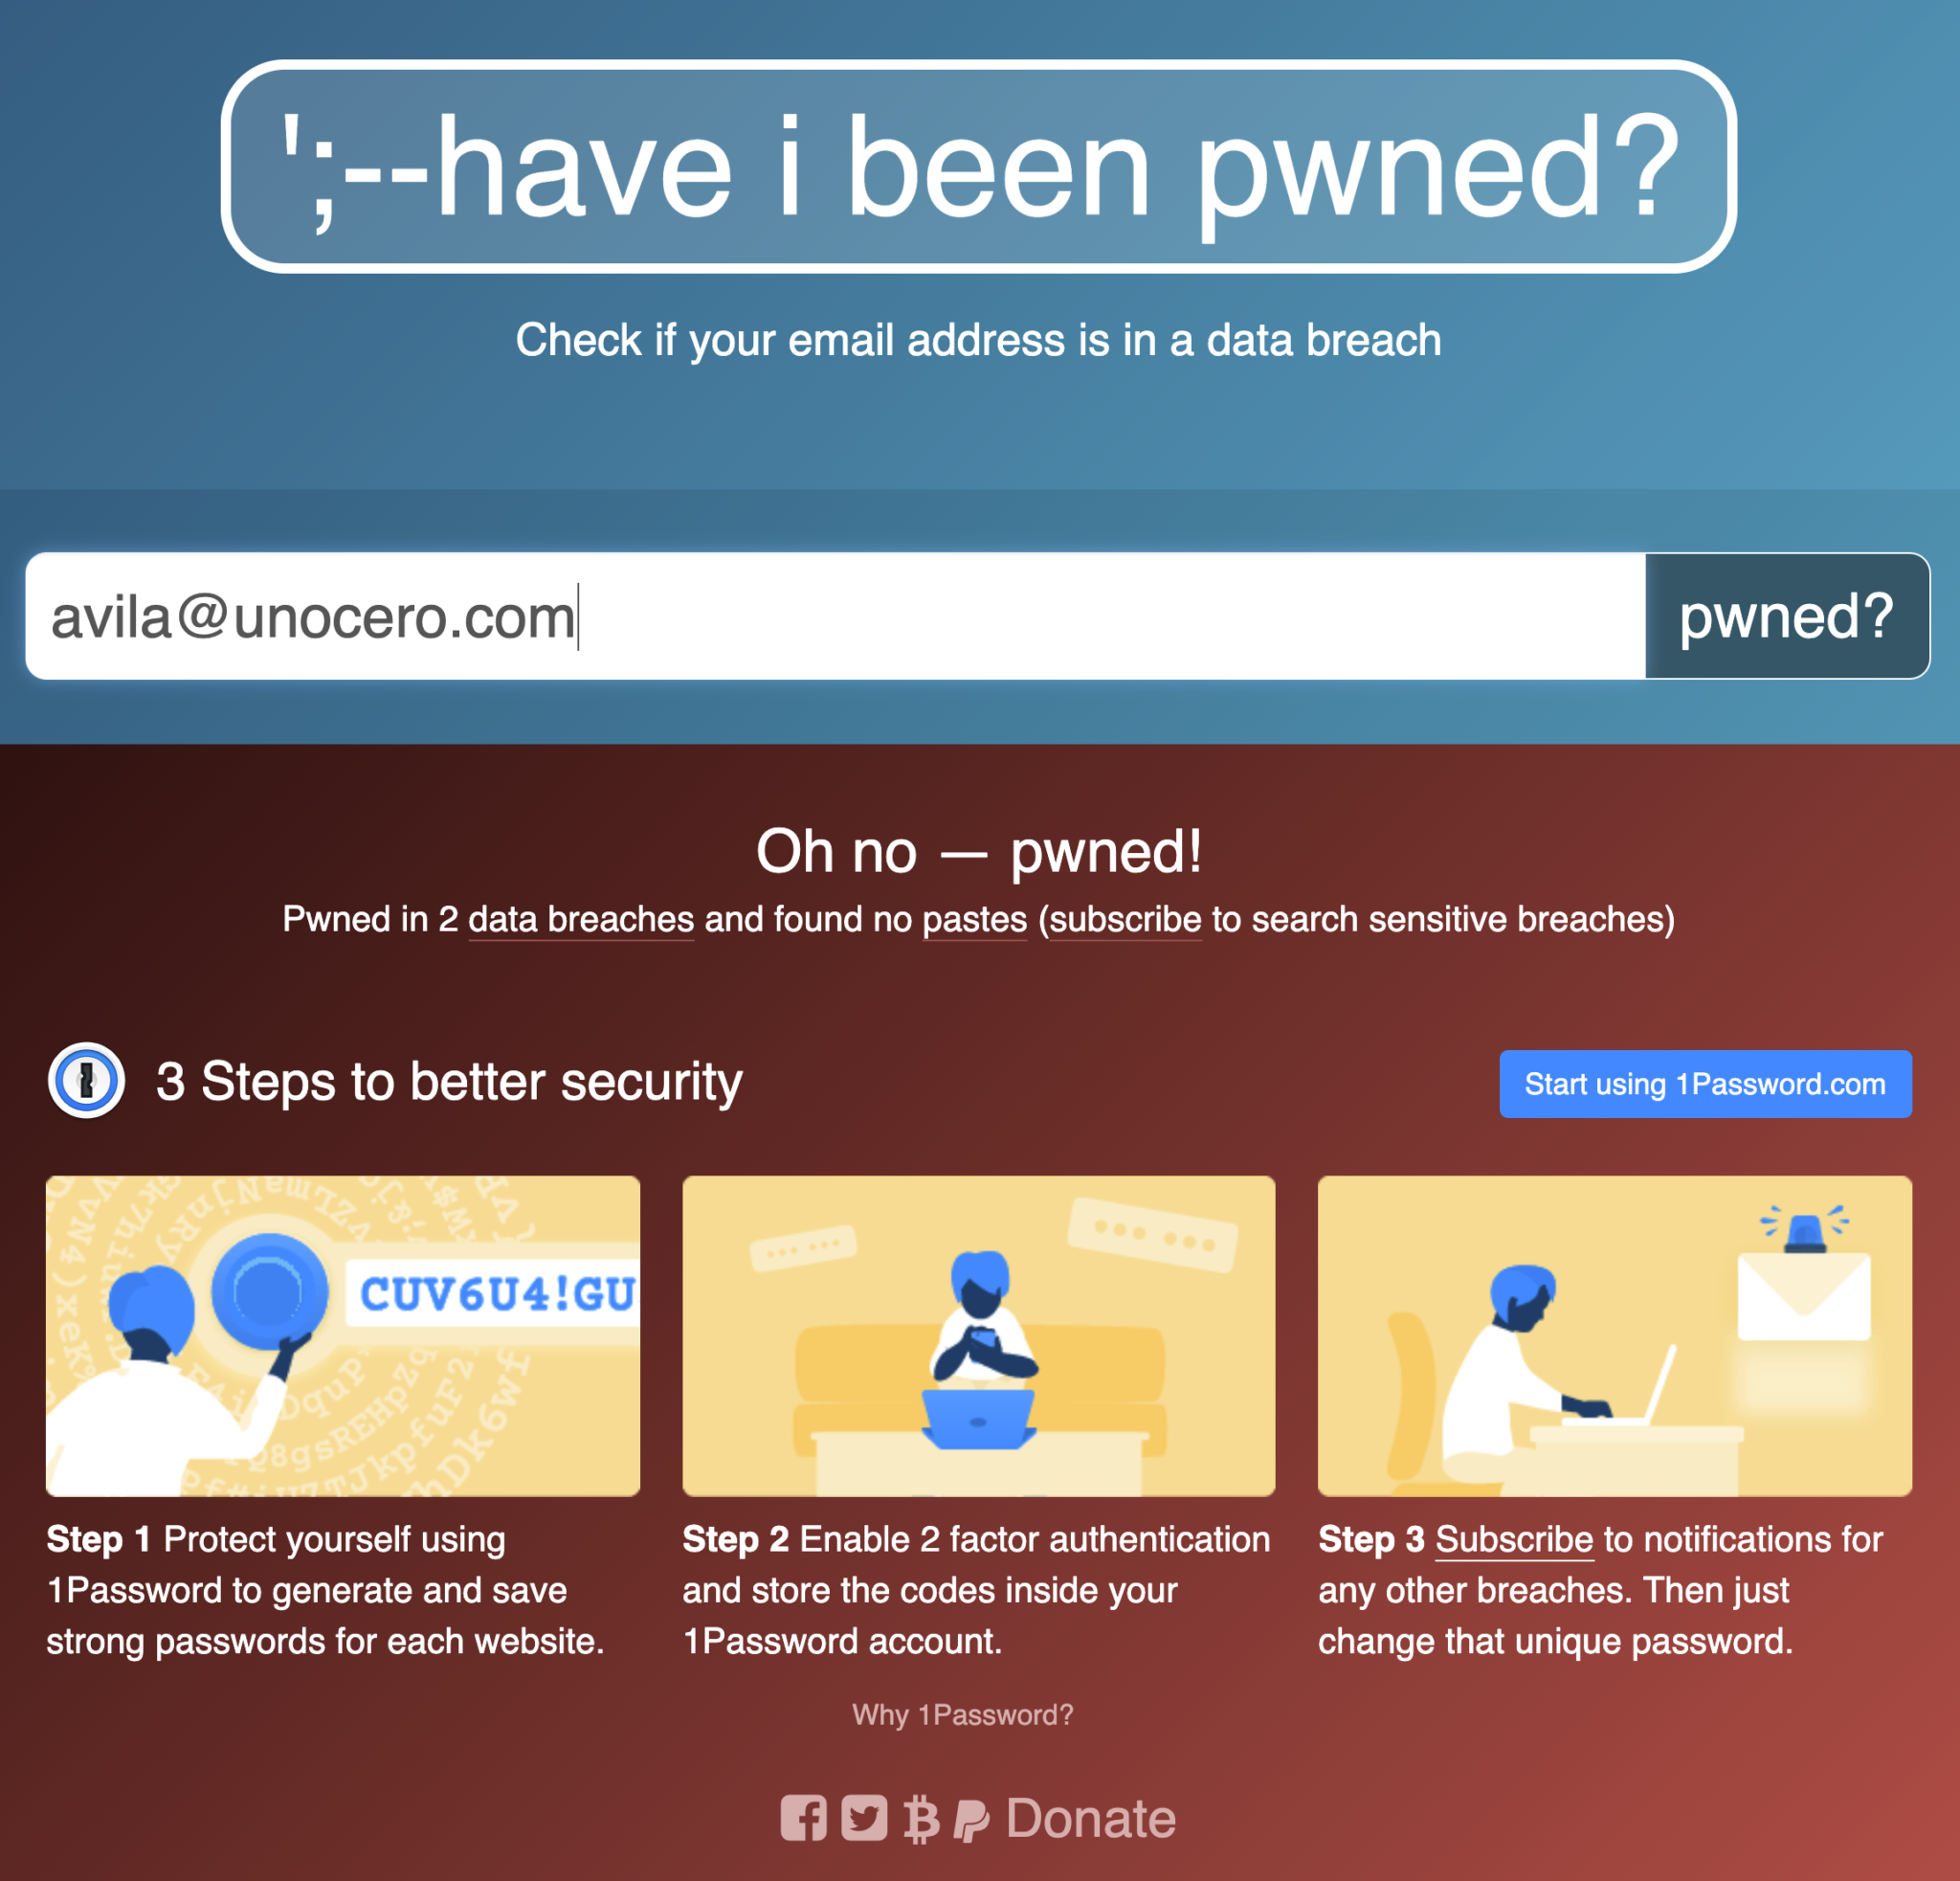 I have been better. Haveibeenpwned. Have pwned. Have been. Facebook data Breach.